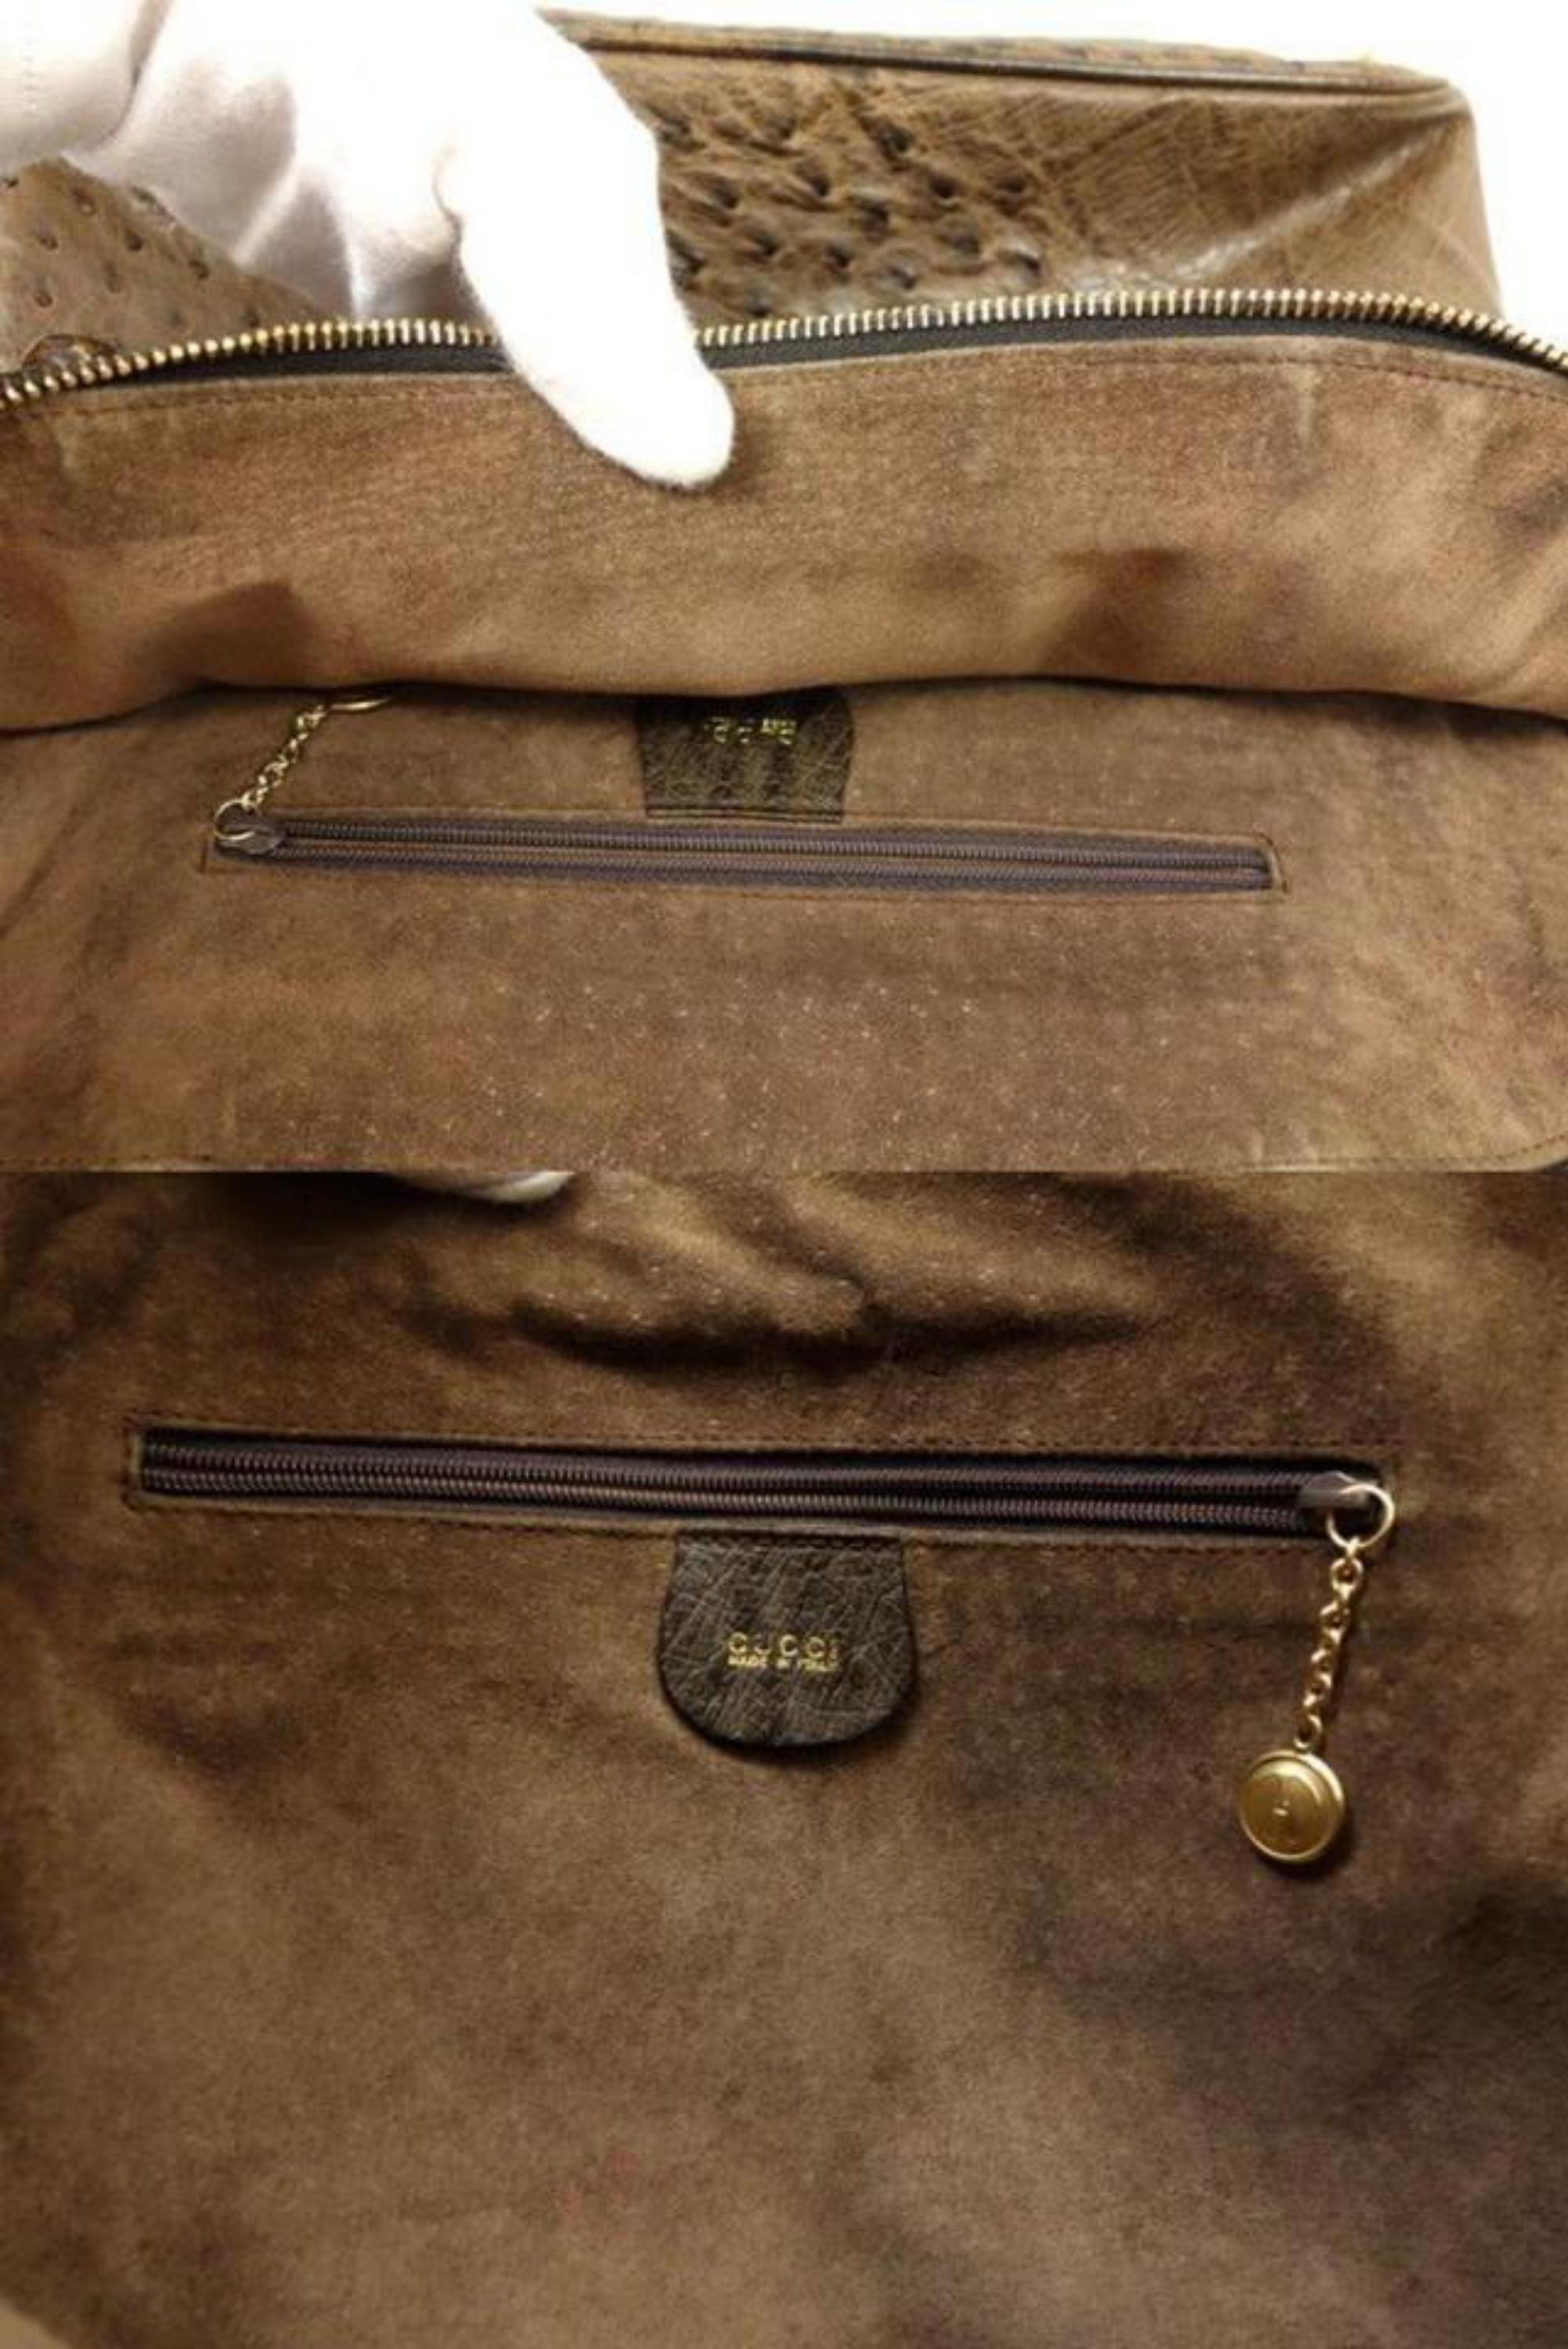 Gucci Dome Bamboo Bowler 228746 Brown Ostrich Leather Satchel In Good Condition For Sale In Forest Hills, NY